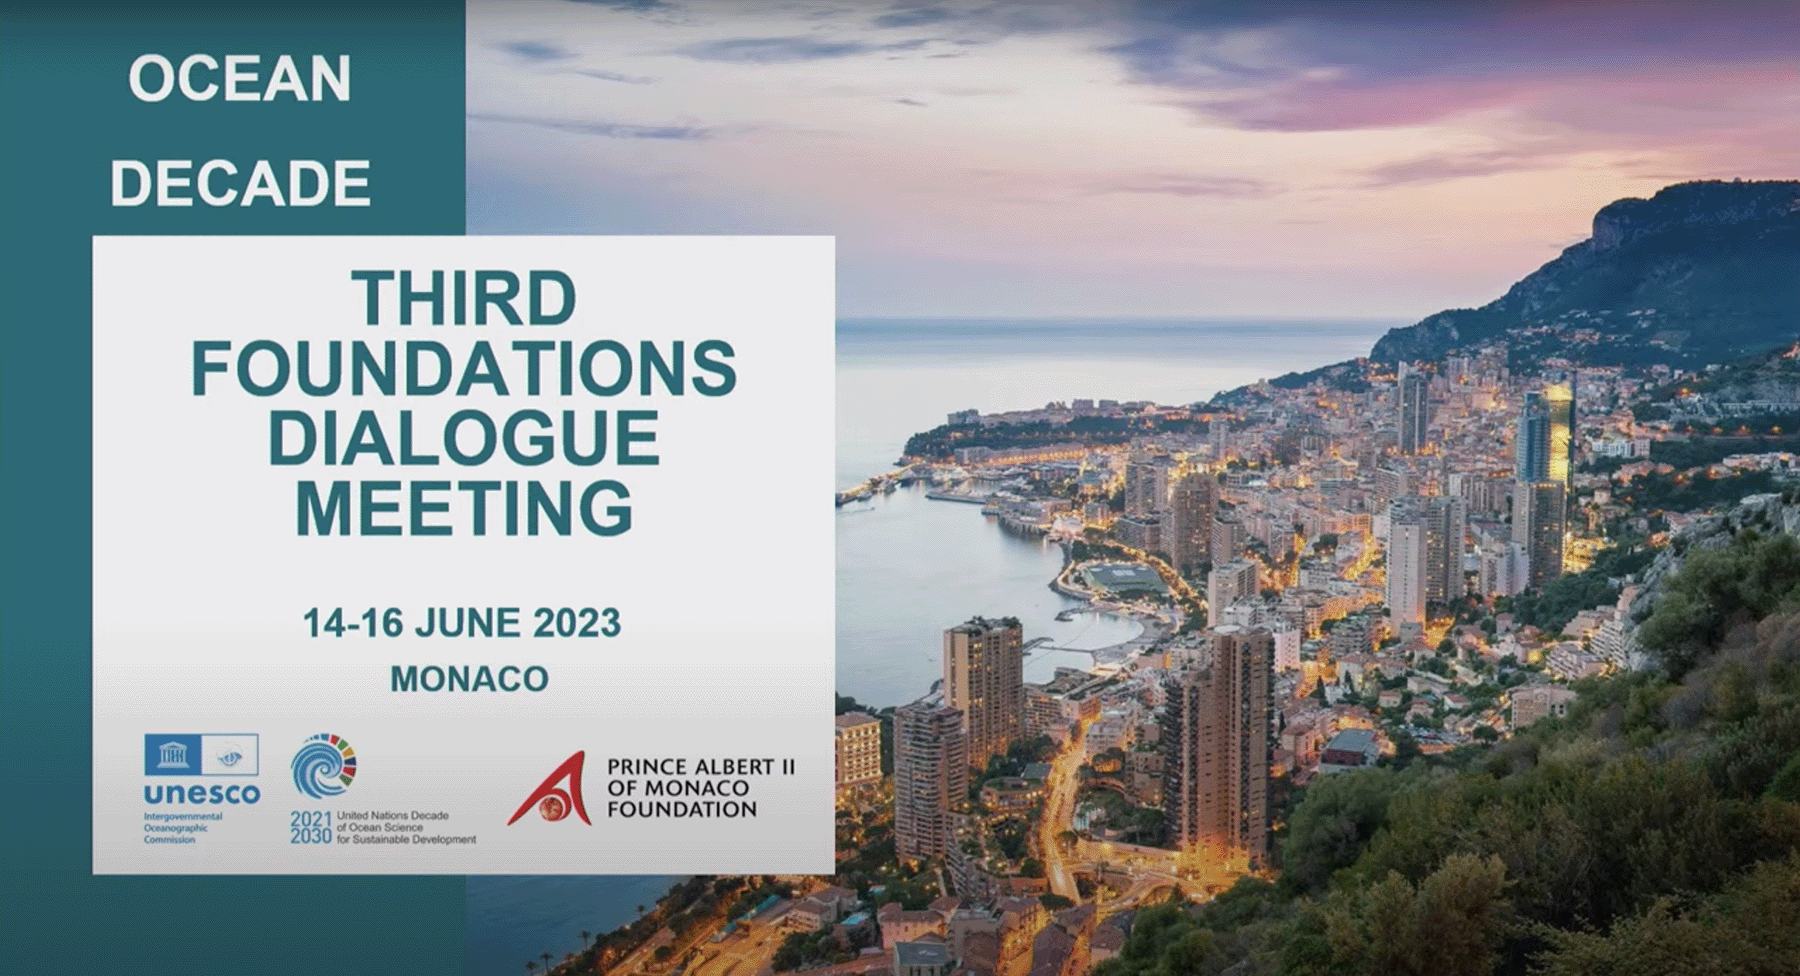 Third Foundations Dialogue Meeting Hosted by the Prince Albert II Foundation in Monaco June 14-16, 2023